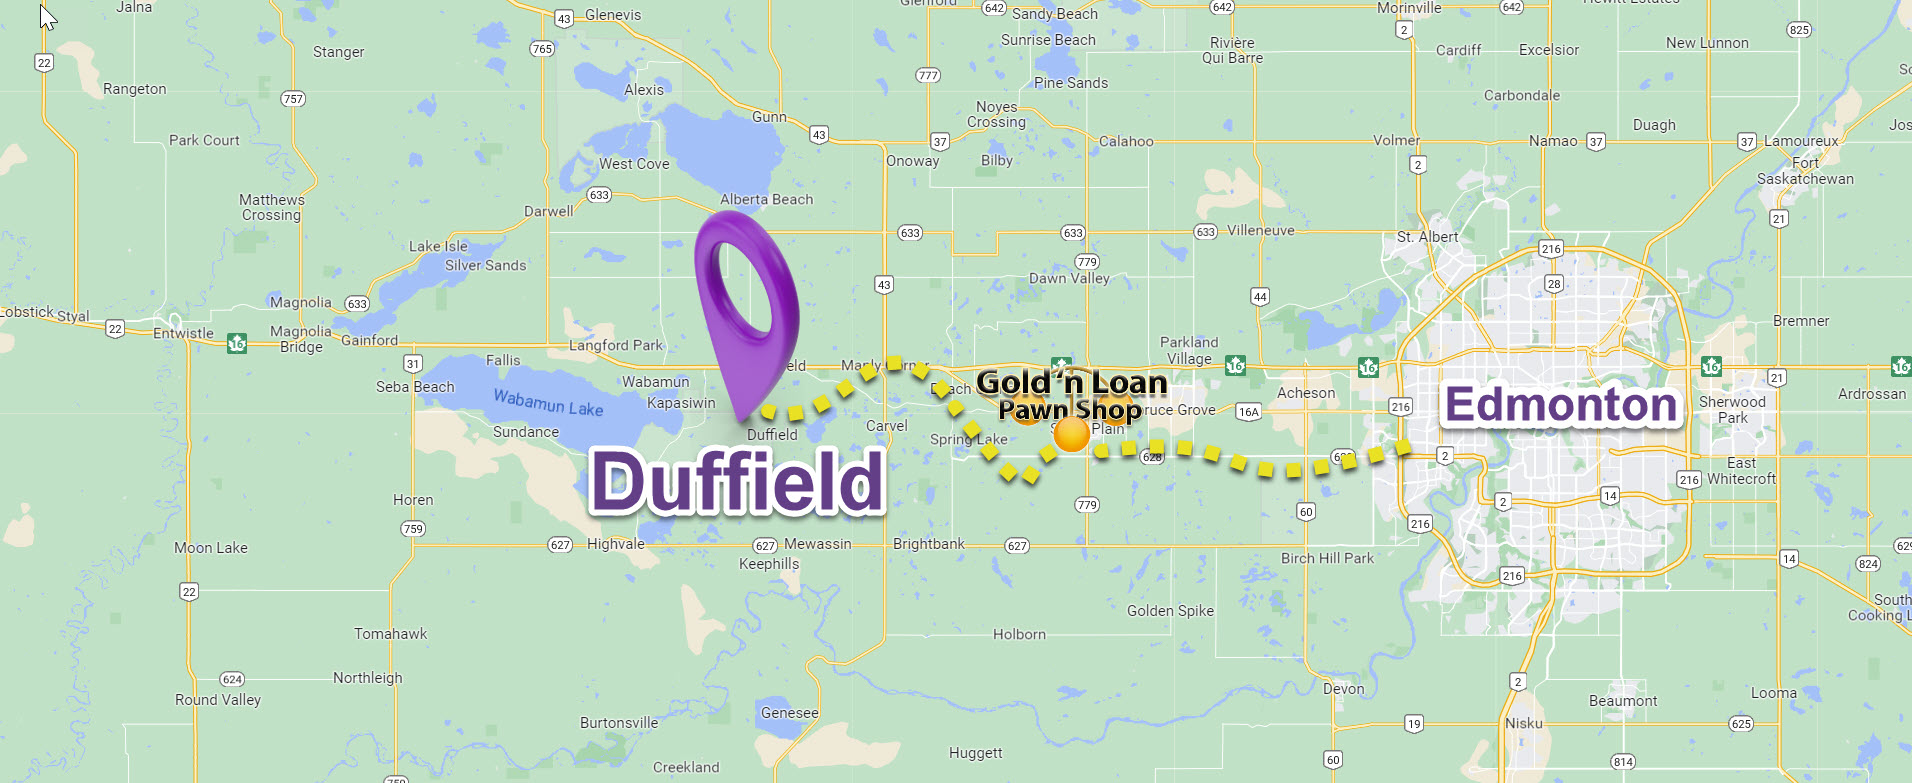 A map illustrating directions from Duffield to Gold'n Loan Pawn to Edmonton